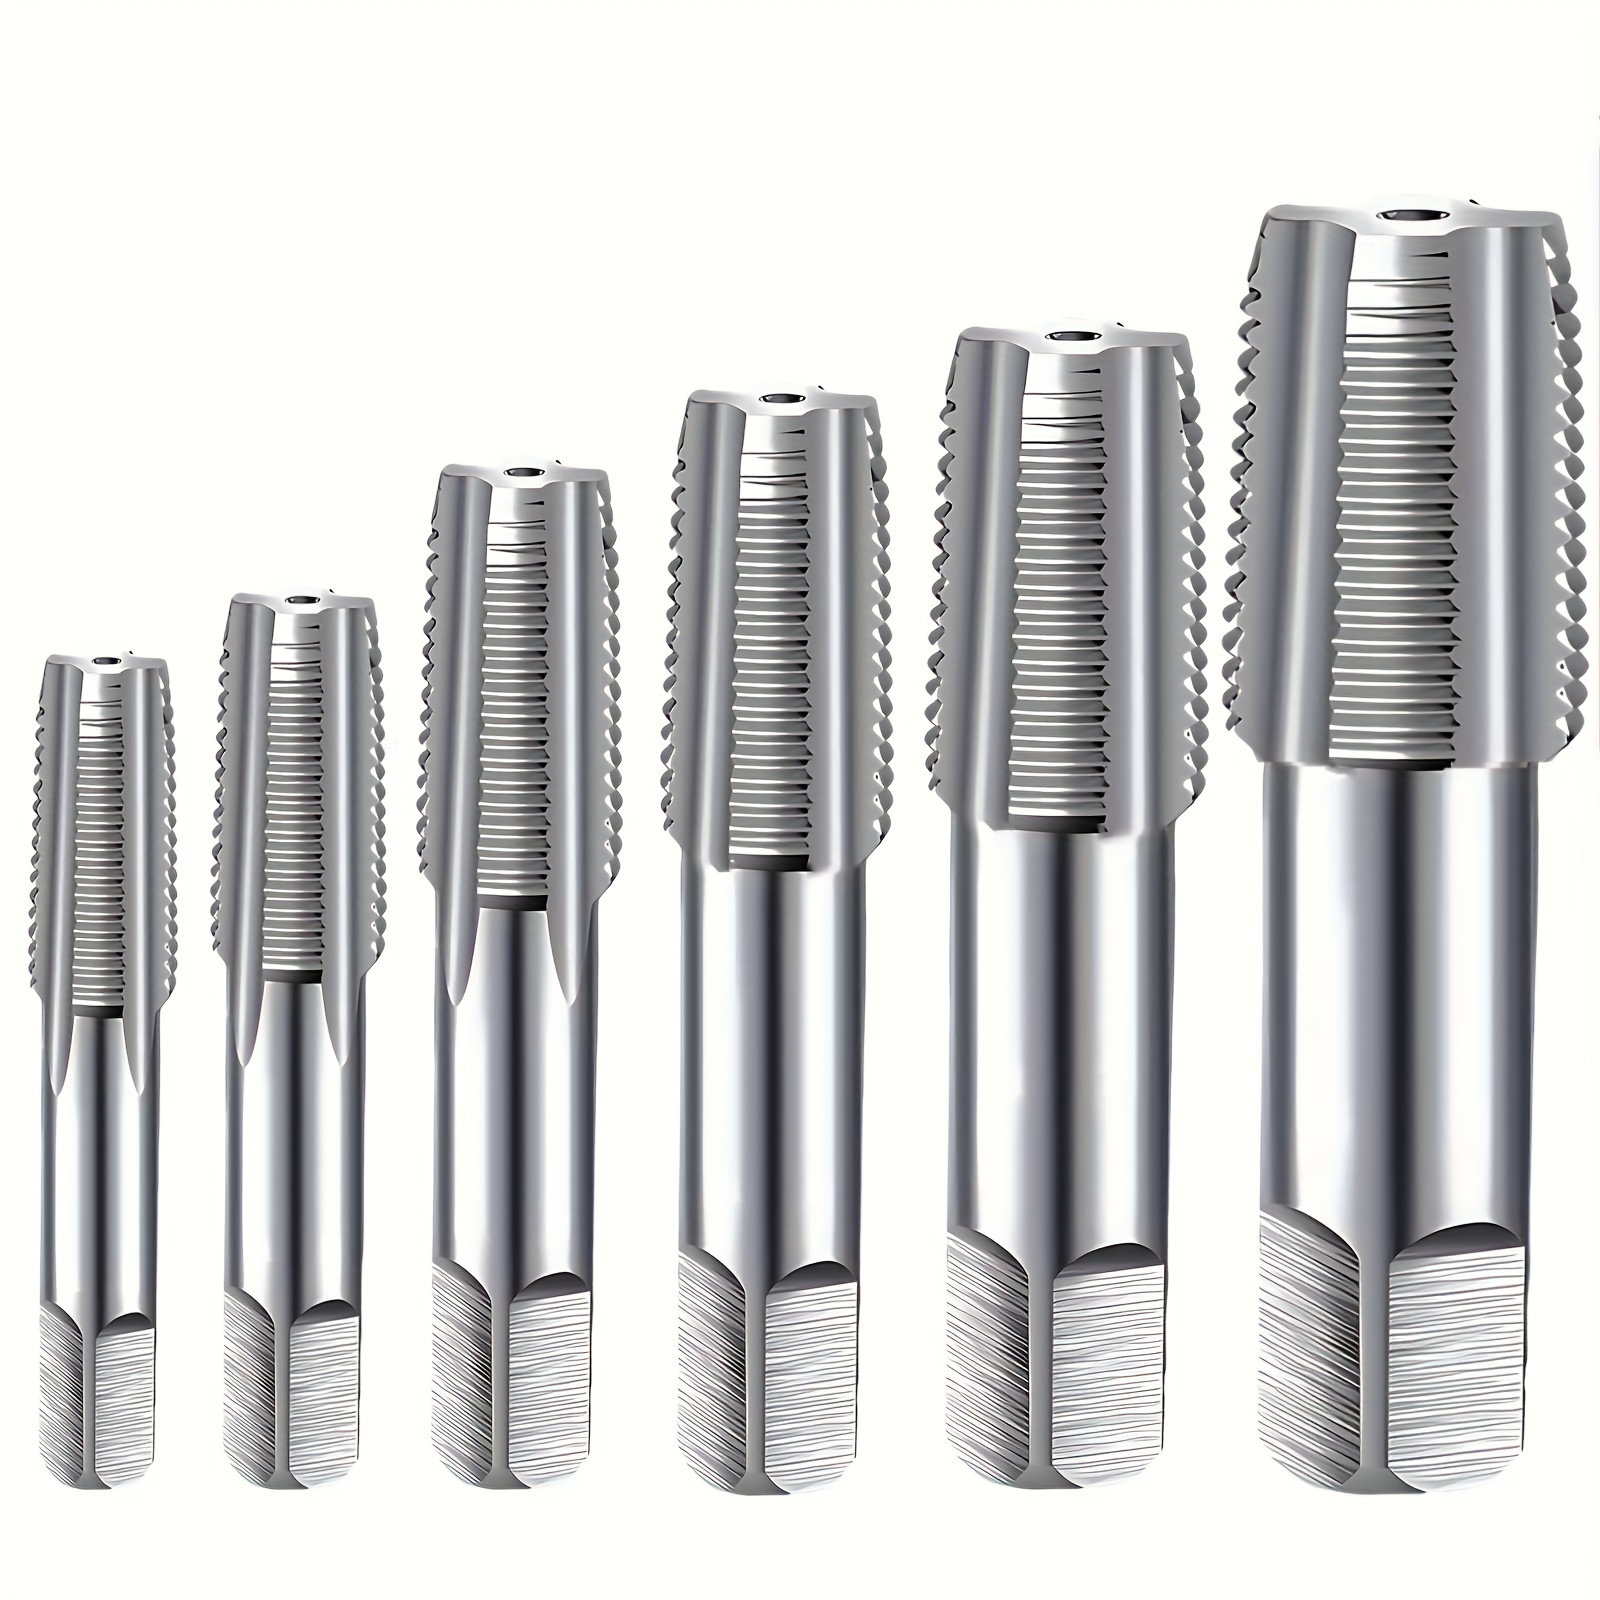 

5pcs/6pcs Pipe Tap Set 1", 1/2", 3/8", 1/4", 1/8" And 3/4" Bearing Steel Pipe Tap Set - Professional Metal Thread Cutting Tools For Machining And Threading